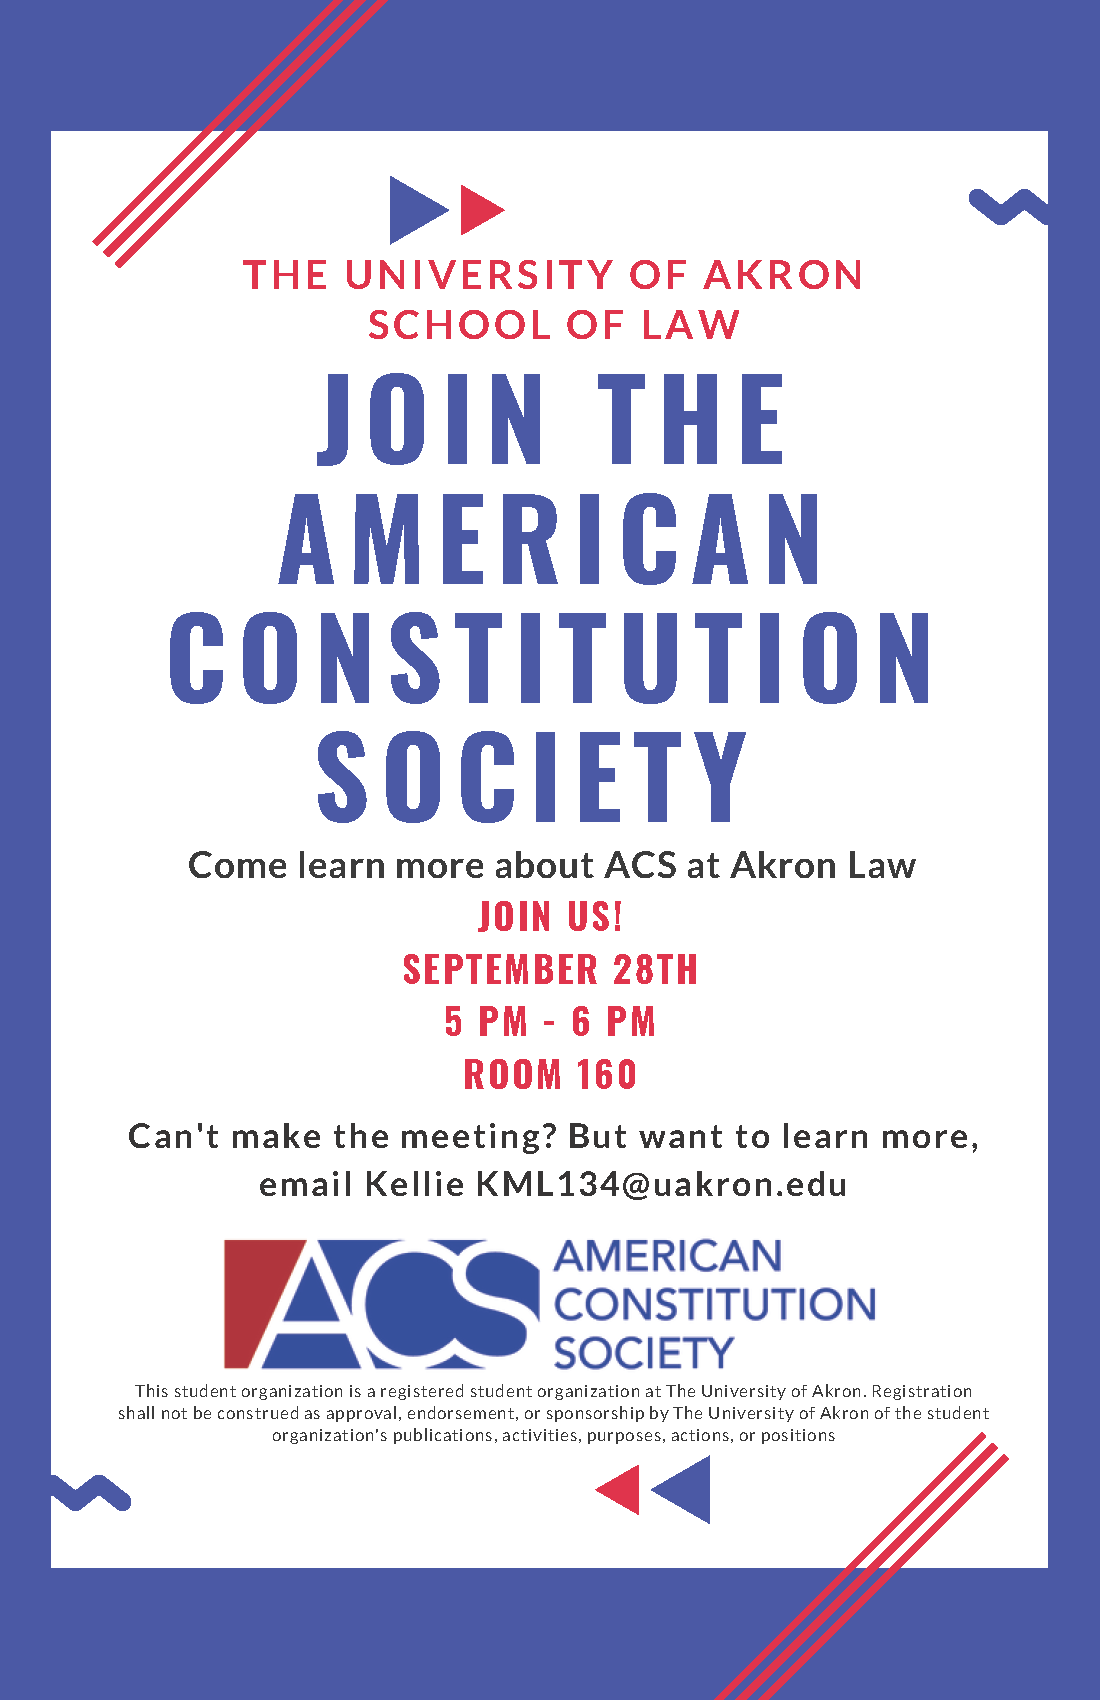 ACS General Meeting Scheduled for Tuesday September 28th at 5pm Room 160